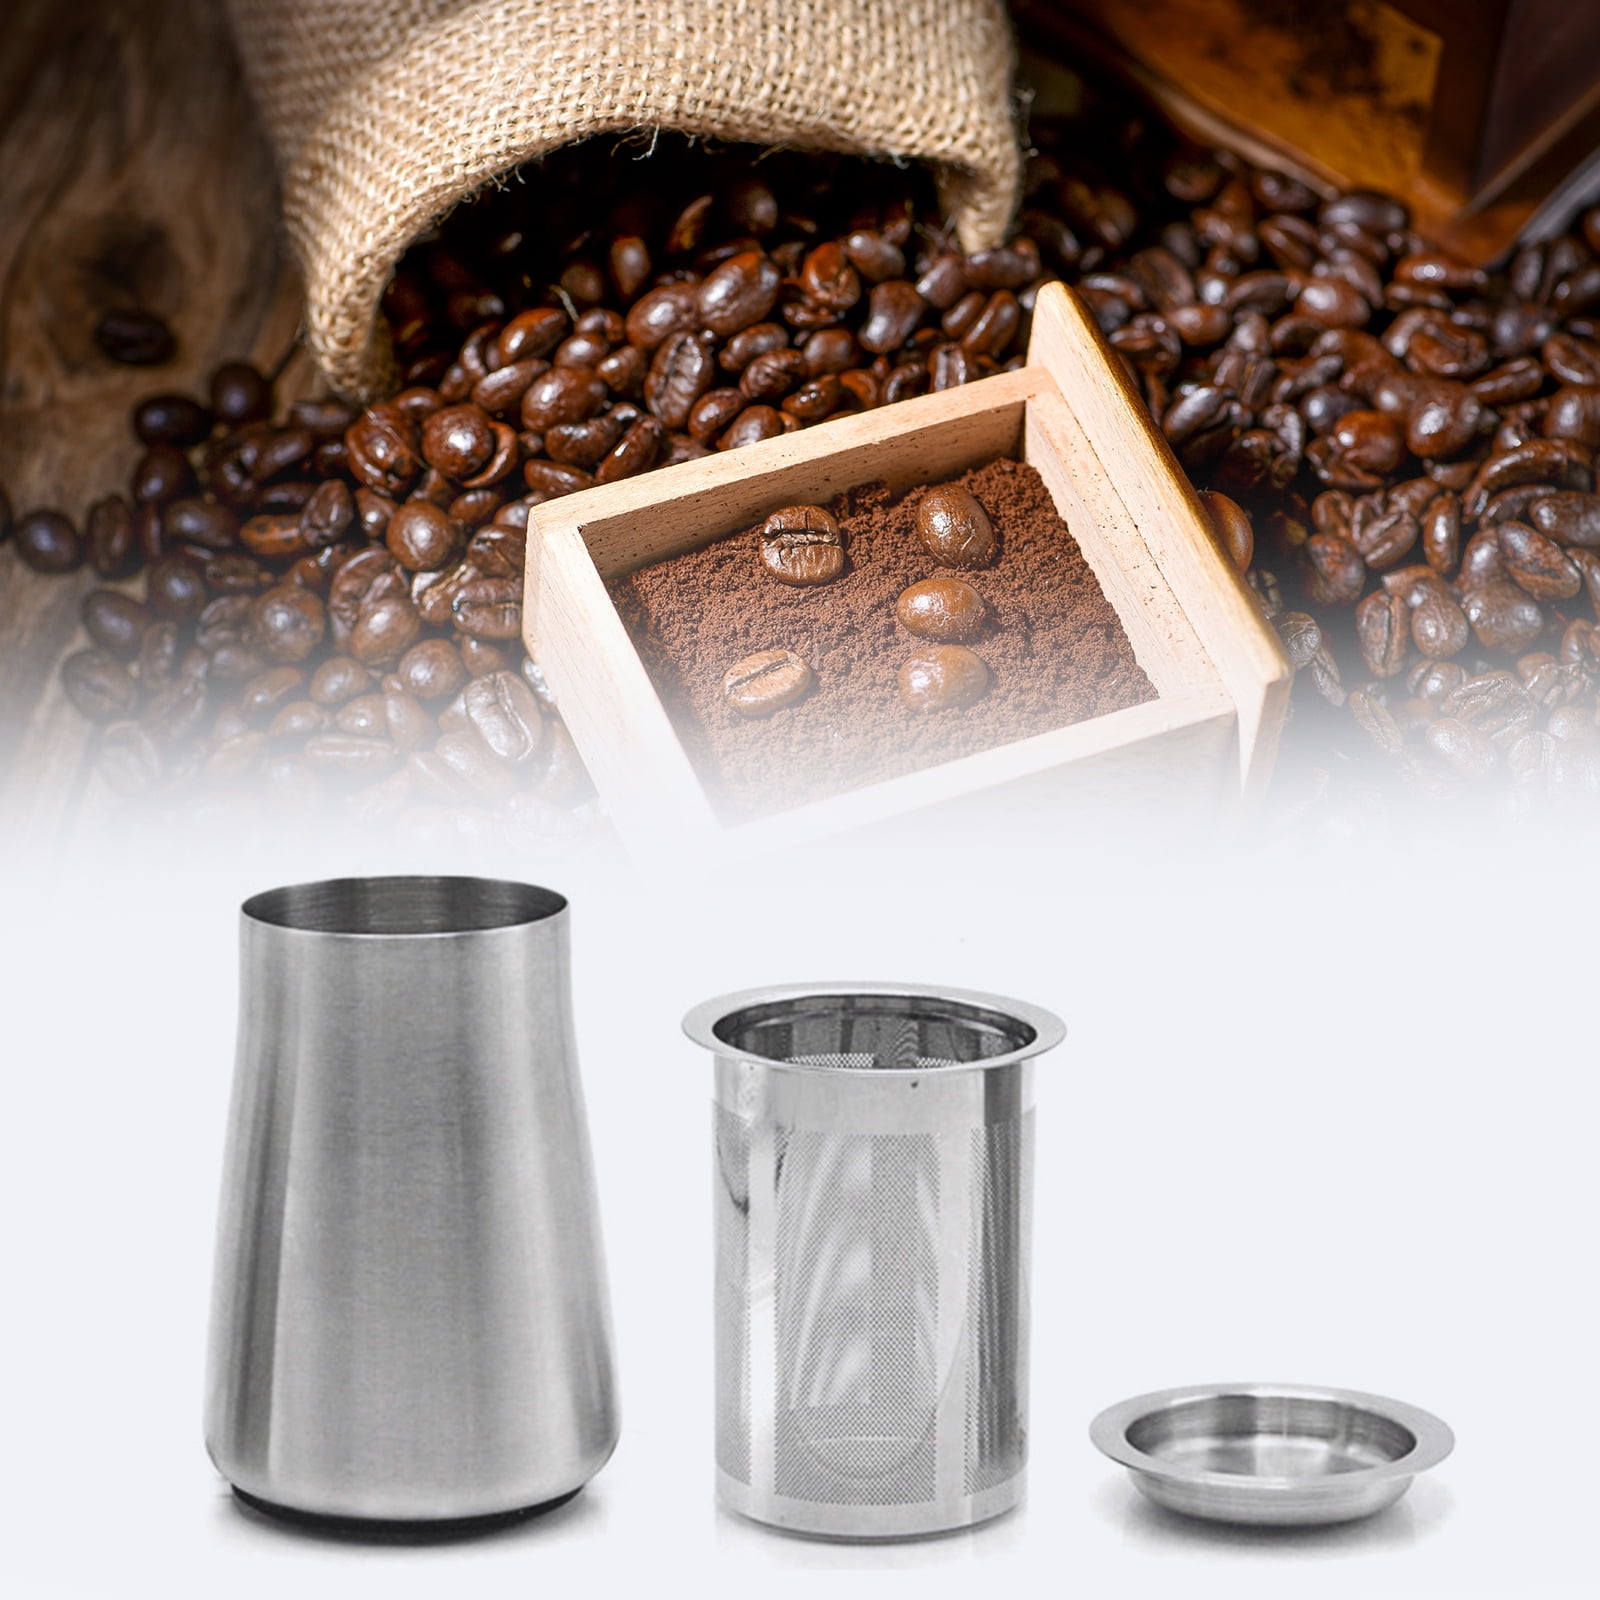 Stainless Steel Spice Shaker, Powder Shaker Coffee Sieve Fine Mesh Strainer  With Lid (d-583-a)